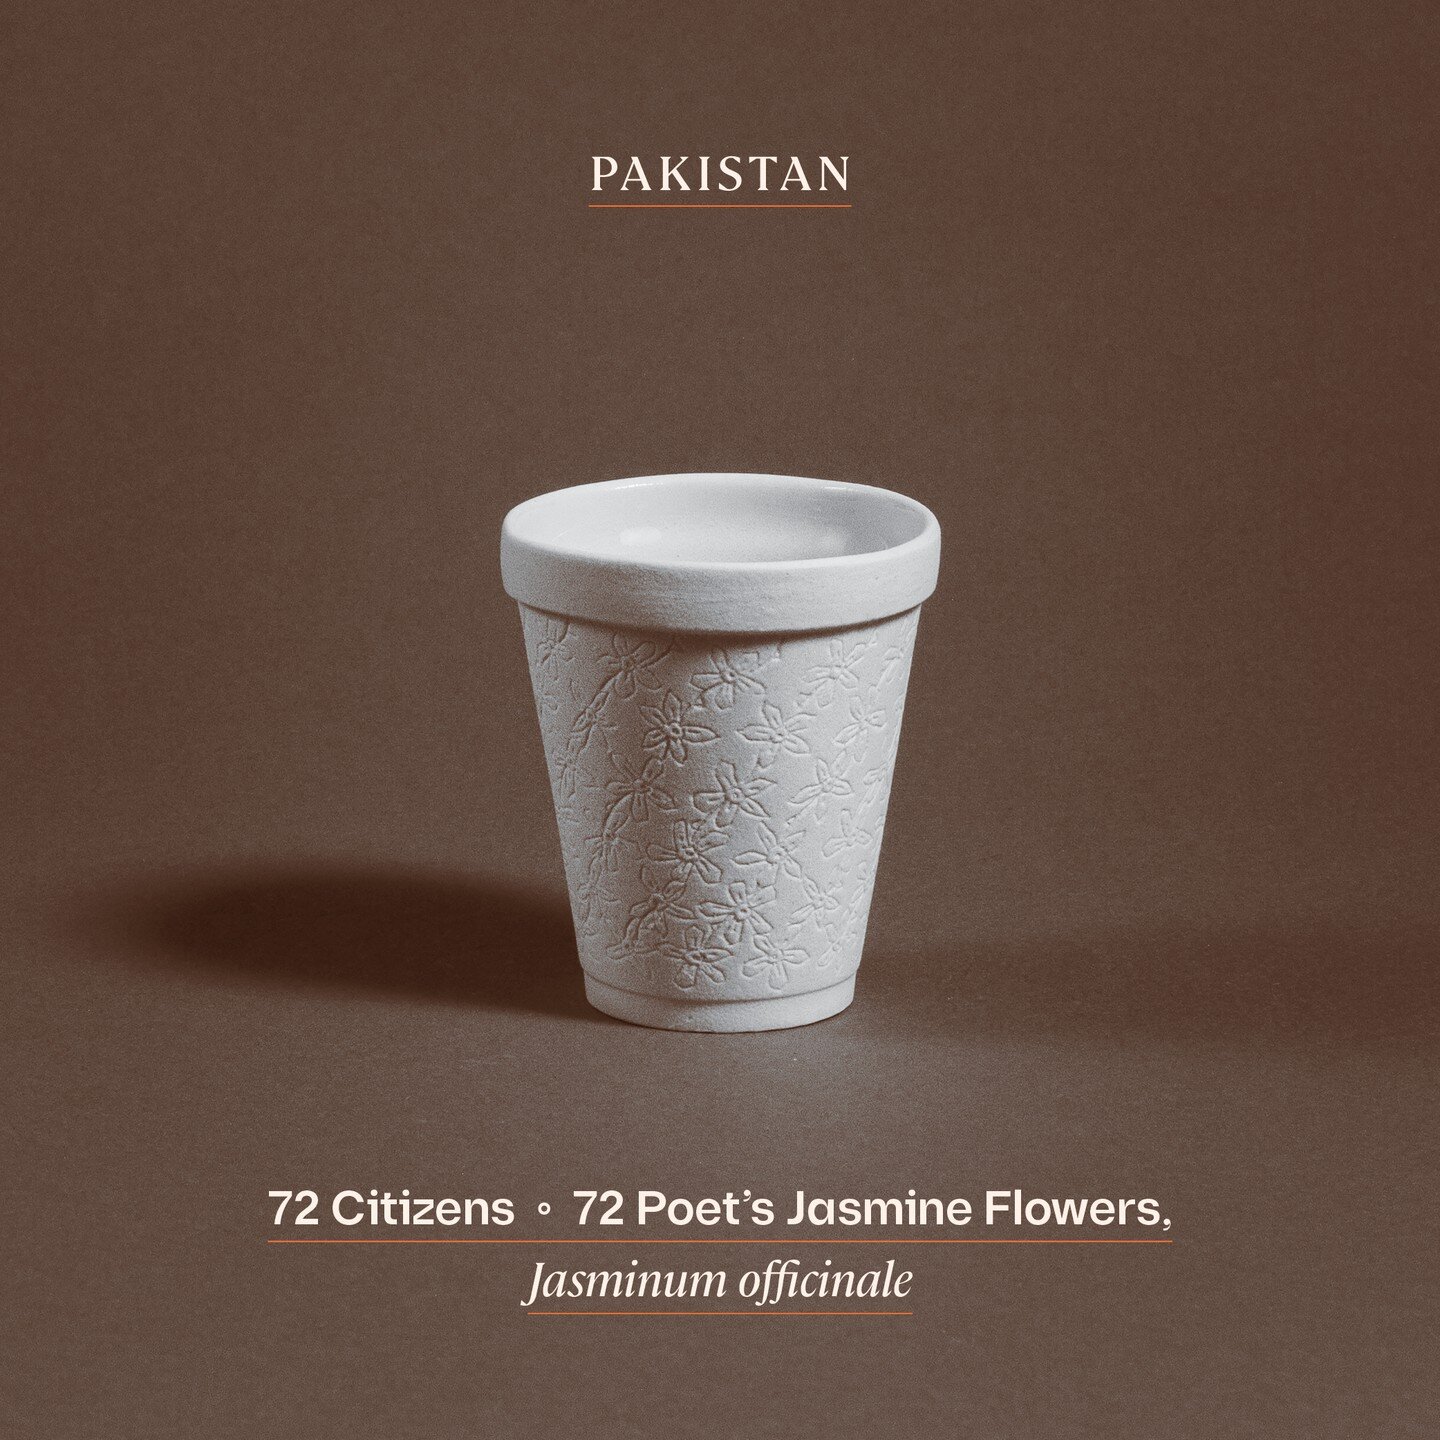 PAKISTAN

This week we prepare tea in reconnection of Khalid Shaikh Mohammed and Abd Al-Aziz Ali, who have been imprisoned at the extralegal military prison in Guantanamo for over 20 years.

INGREDIENTS 
- Cardamom pods 
- Tapal Danedar black tea lea